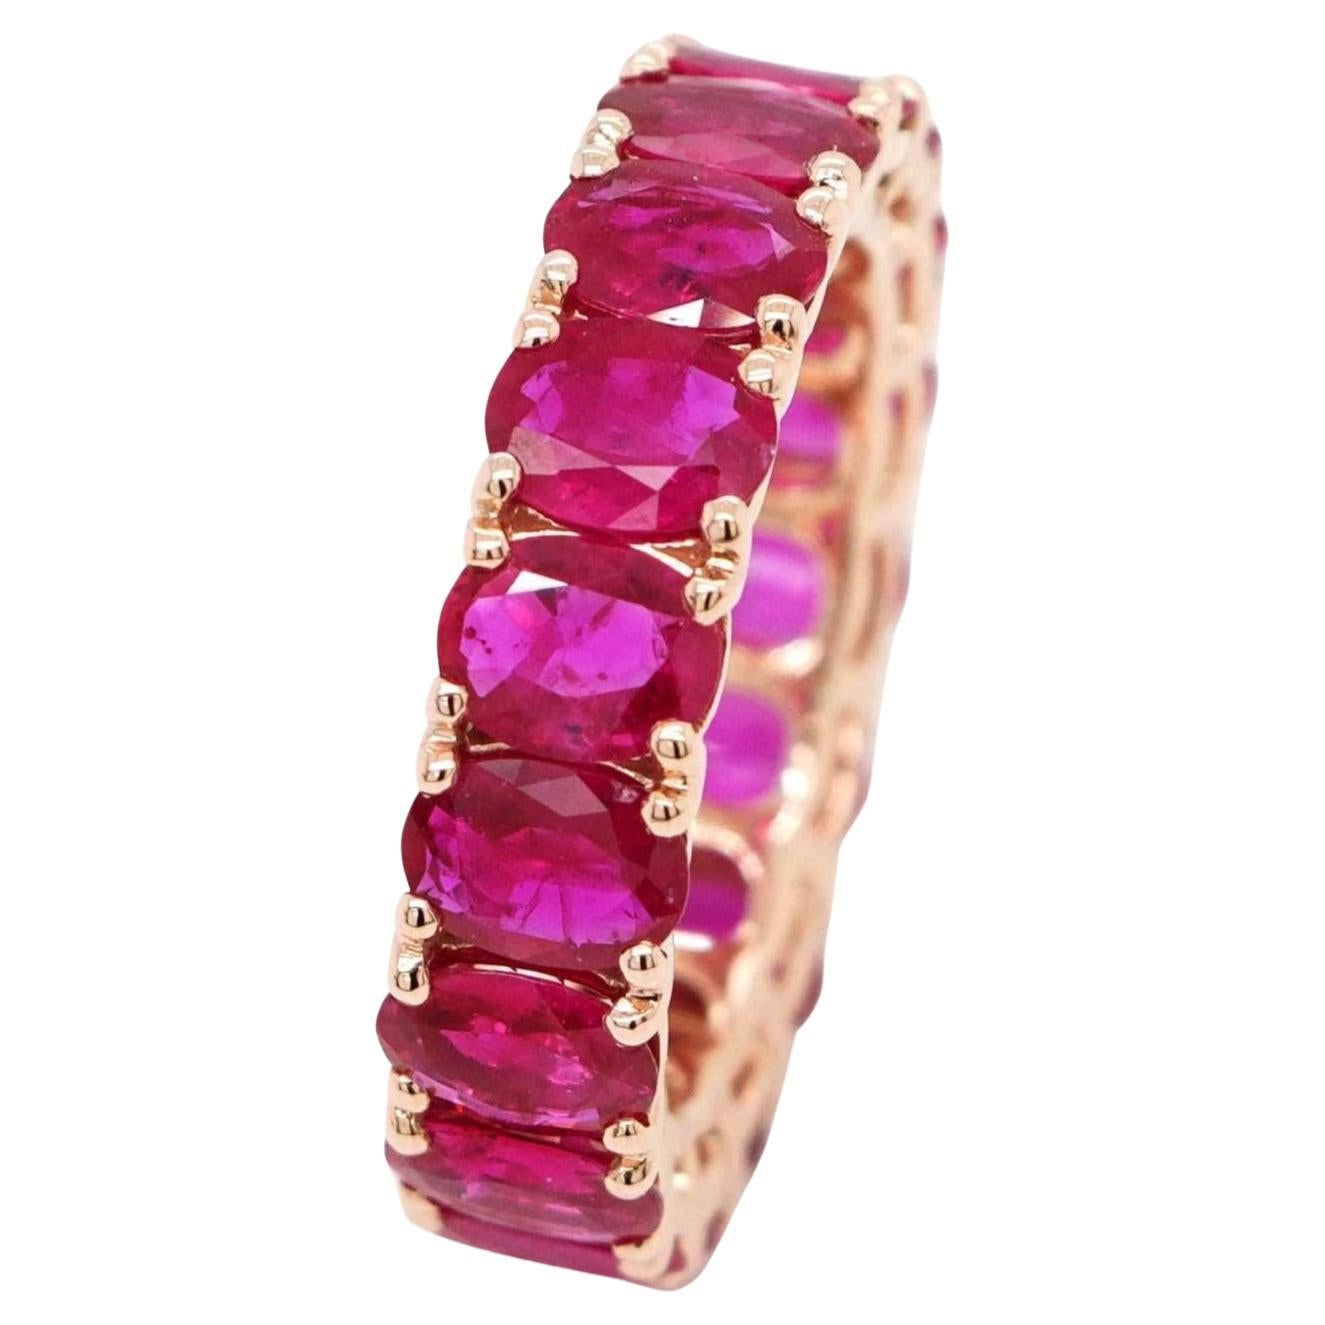 BENJAMIN FINE JEWELRY 5.24 cts Oval Ruby 18K Eternity Band Ring